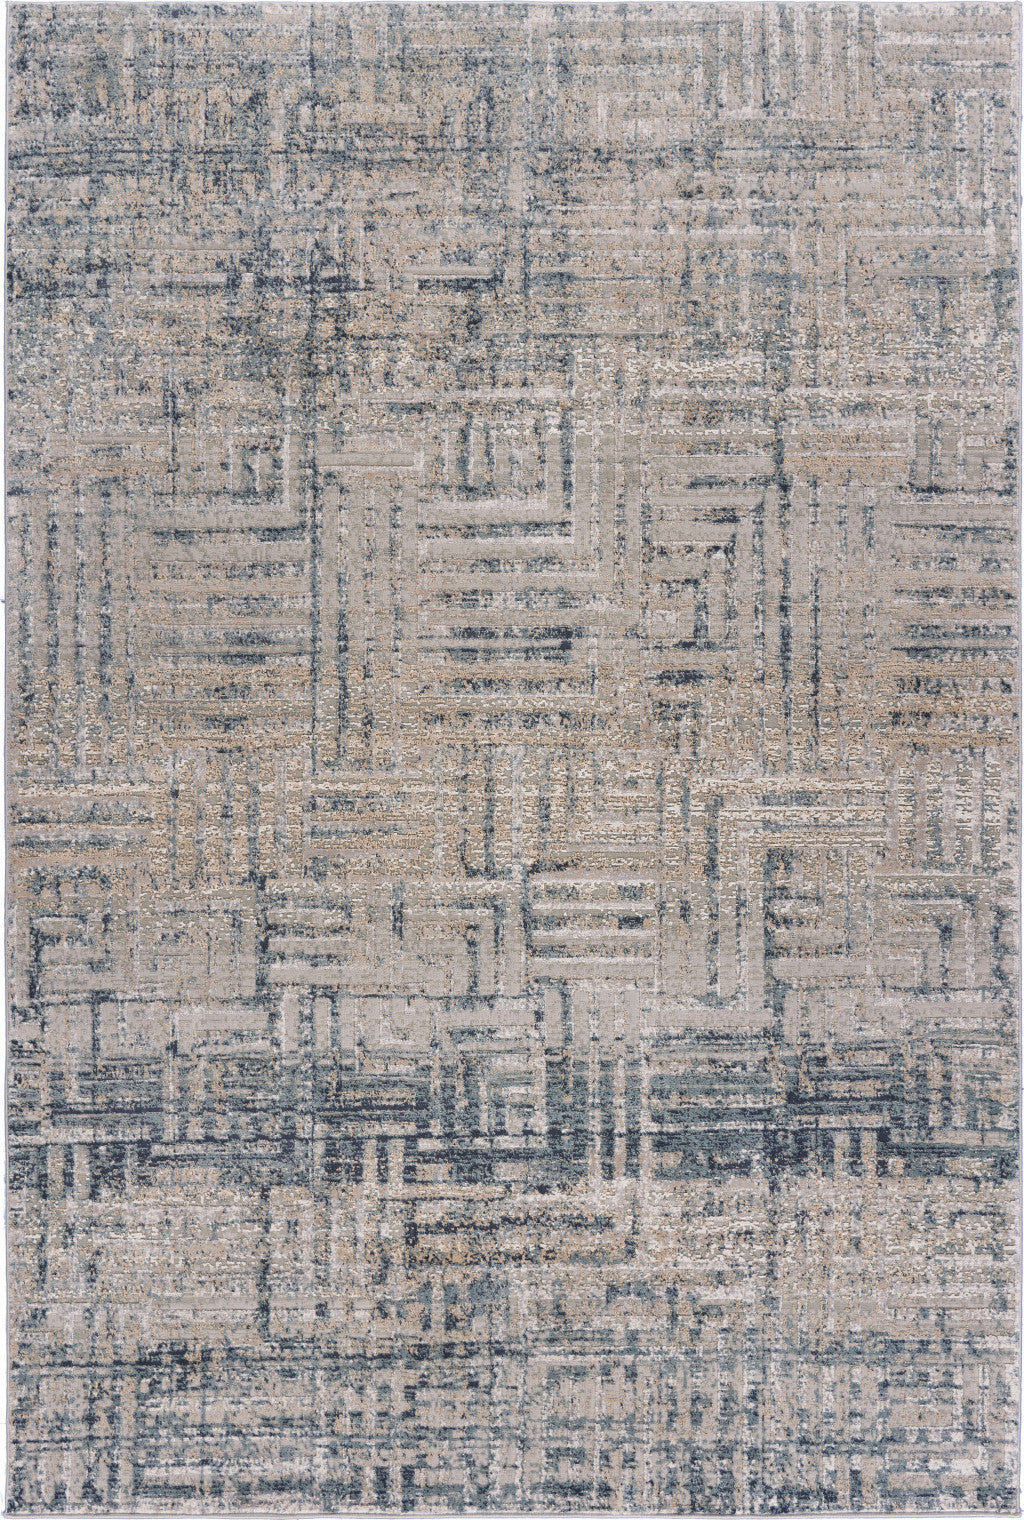 10' X 13' Cream Blue And Ivory Geometric Distressed Stain Resistant Area Rug